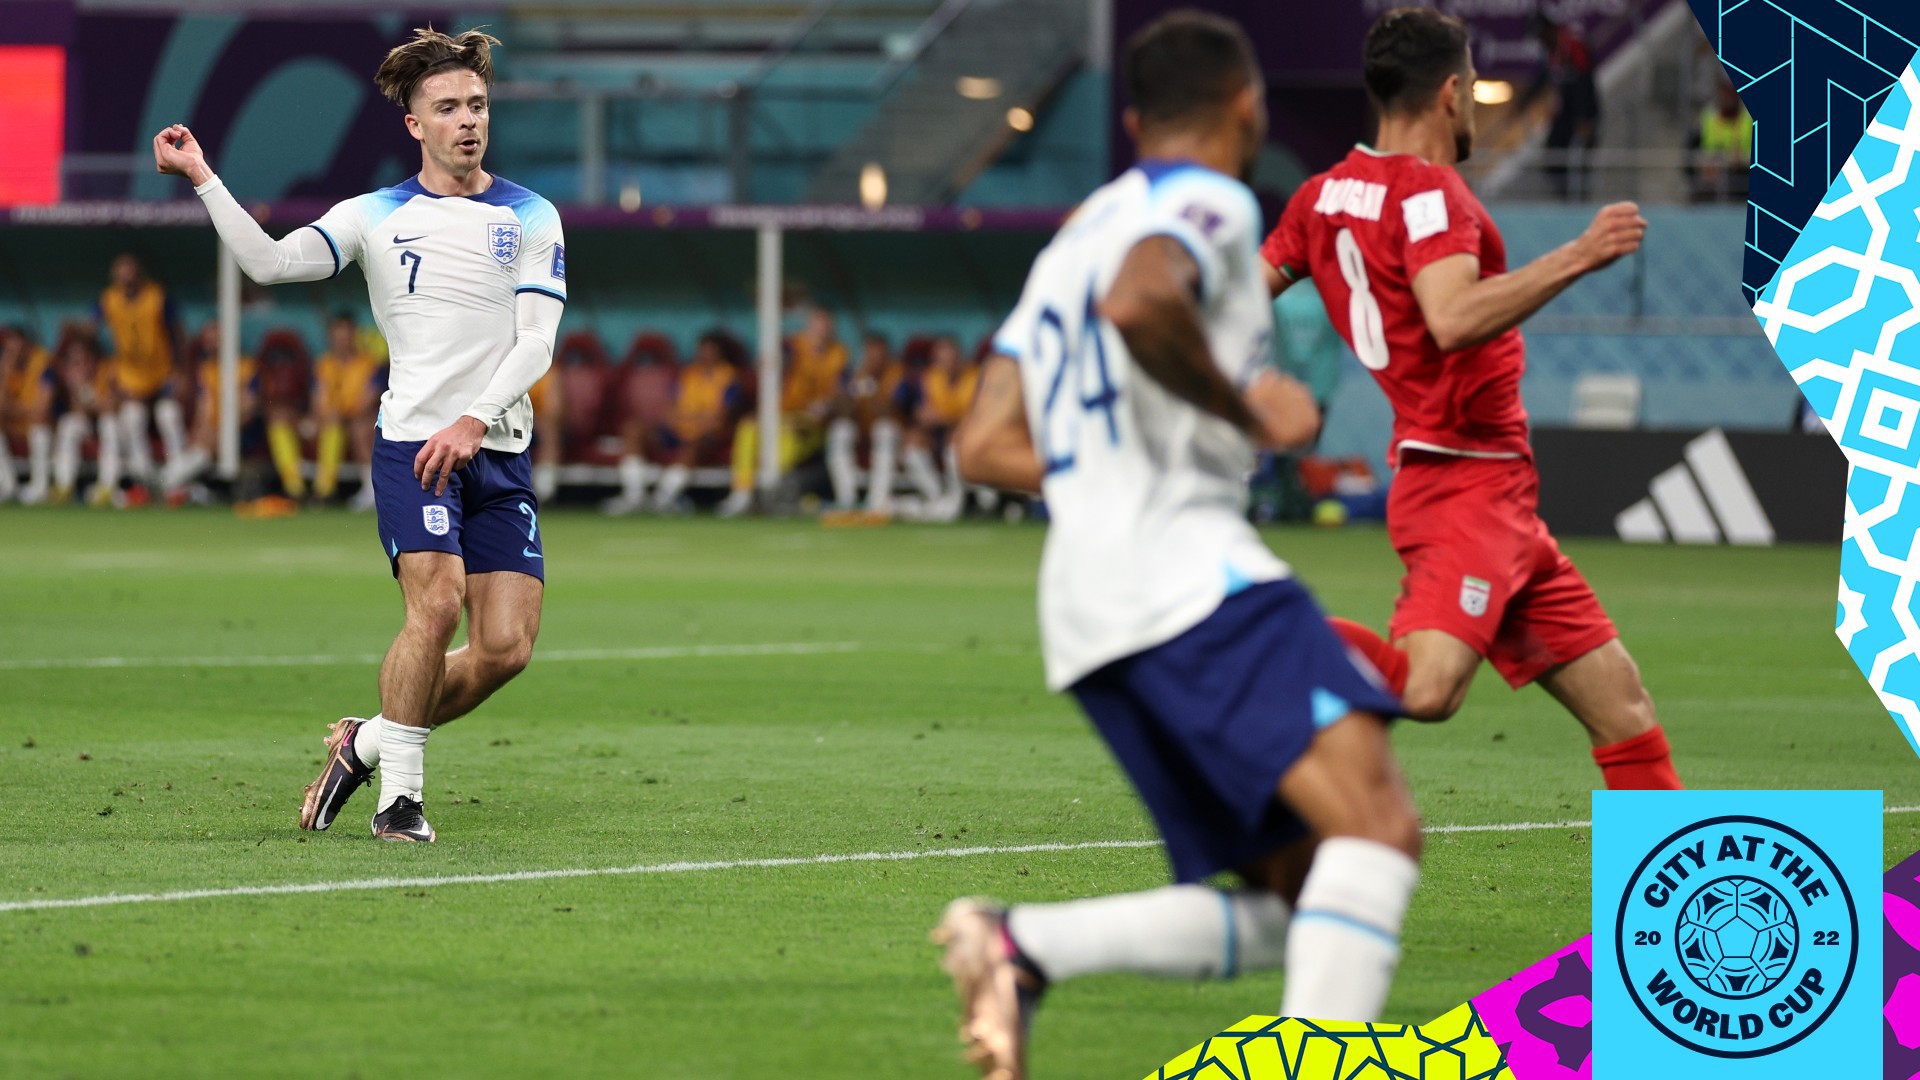 SUPER JACK : Jack Grealish fires home to help England to an opening World Cup win over Iran.